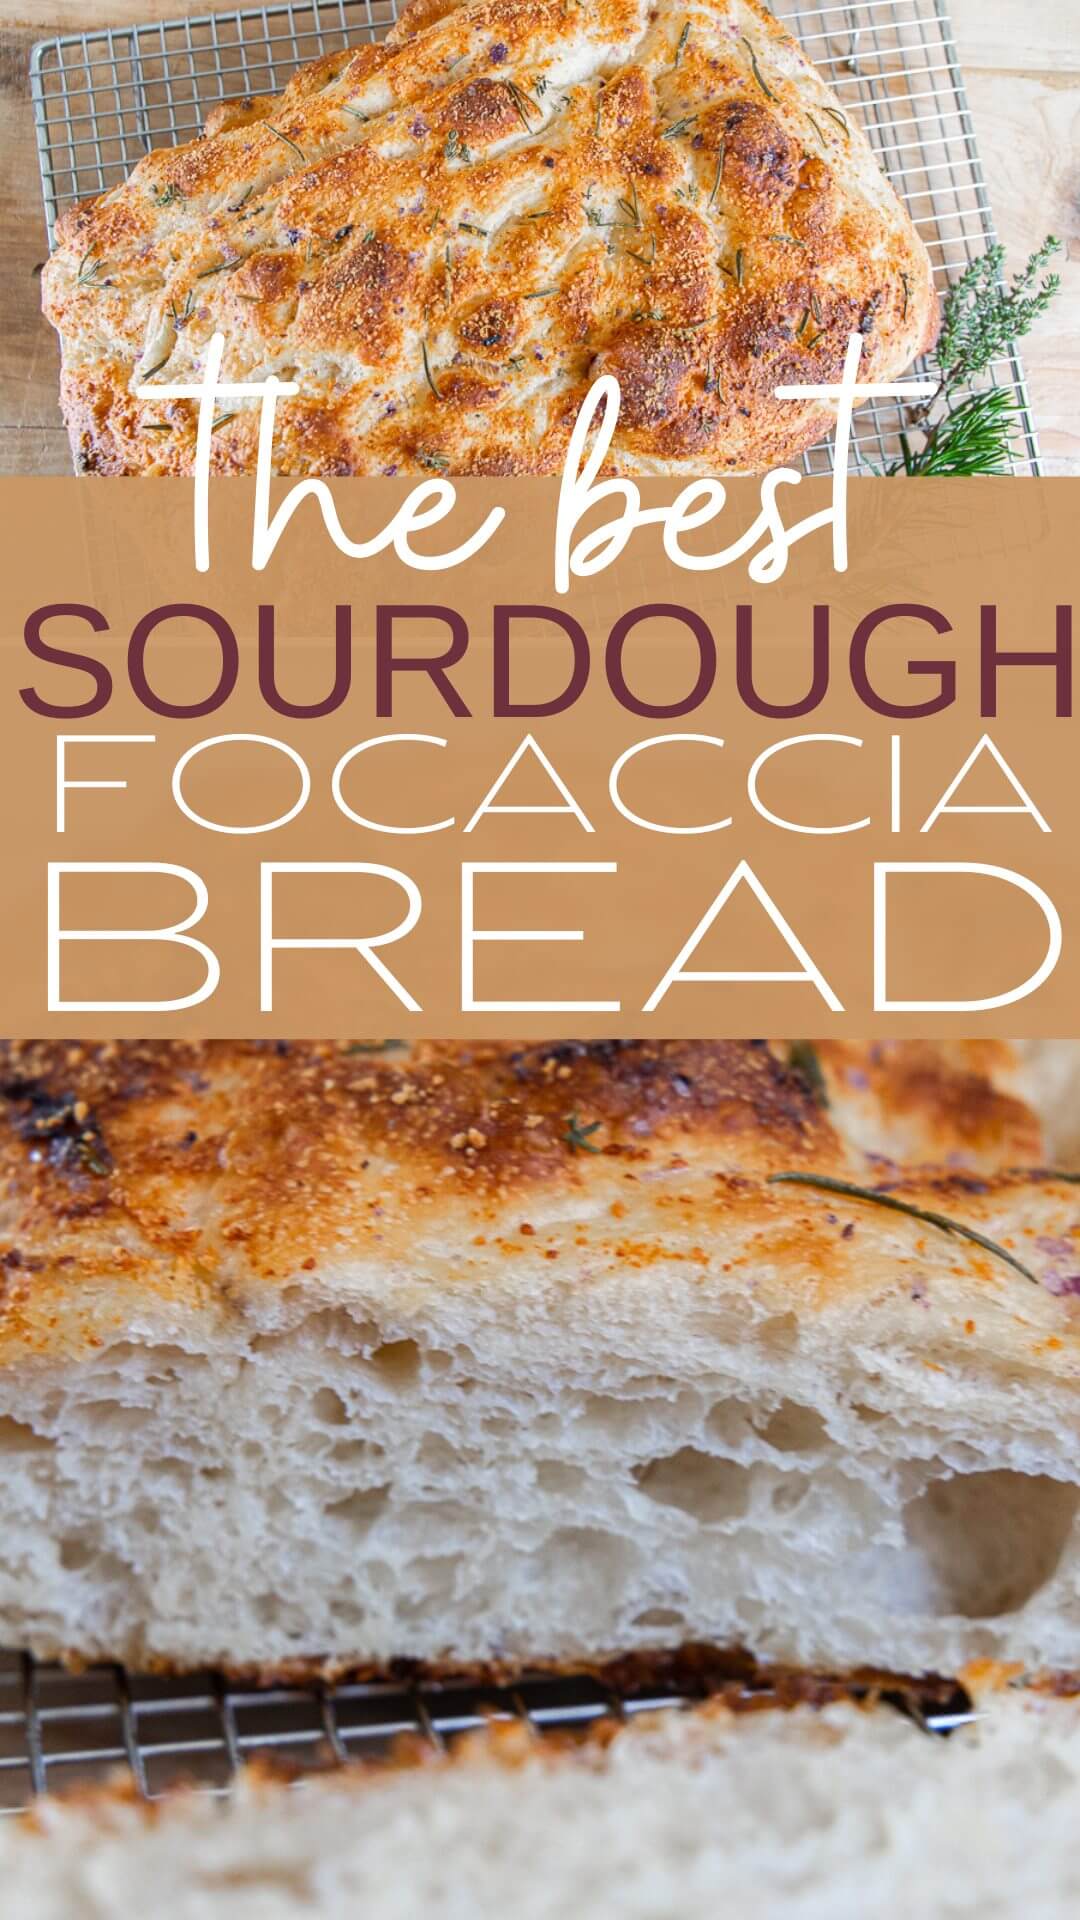 Make this incredibly easy sourdough focaccia bread today! It is easy to make, the flavor is amazing and it is light, fluffy and versatile.